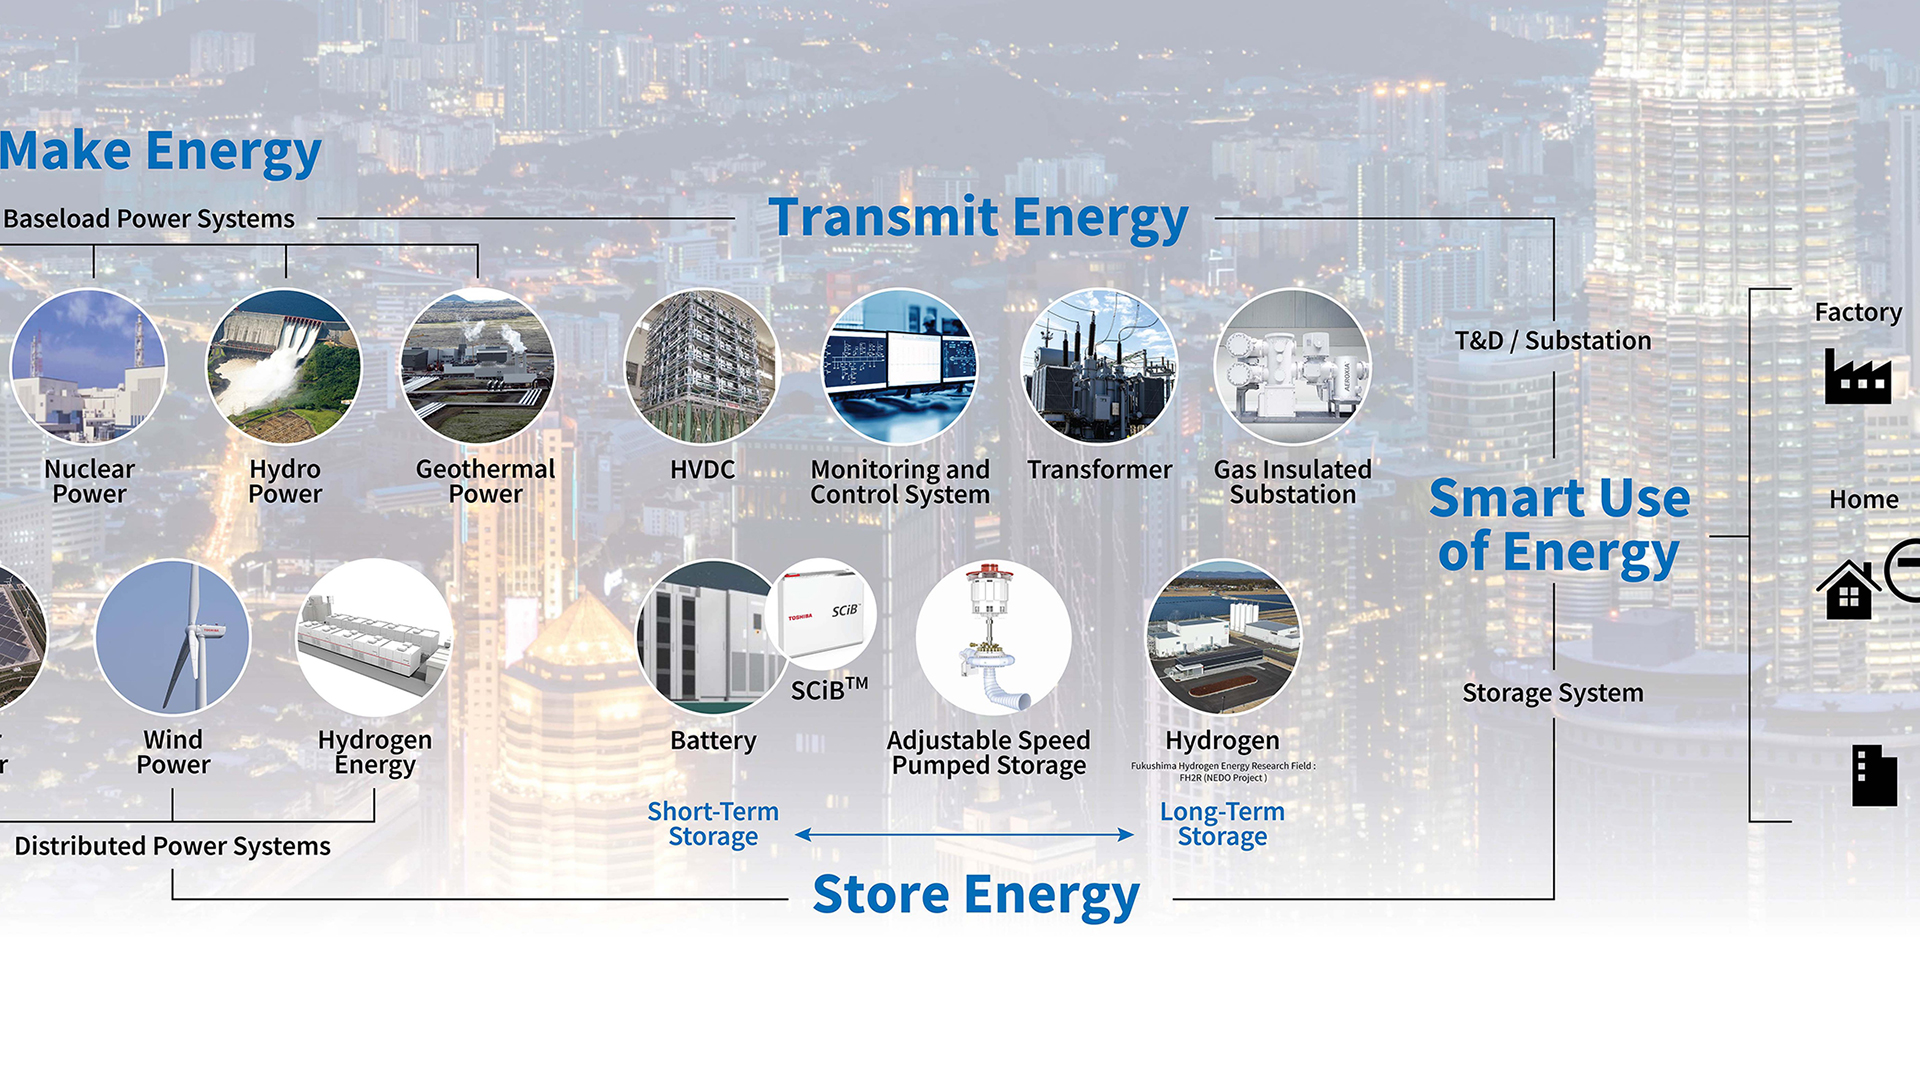 Seamless solutions from Power Generation to Energy Transmission incorporating Energy Storage Solutions to Smart Use of Energy